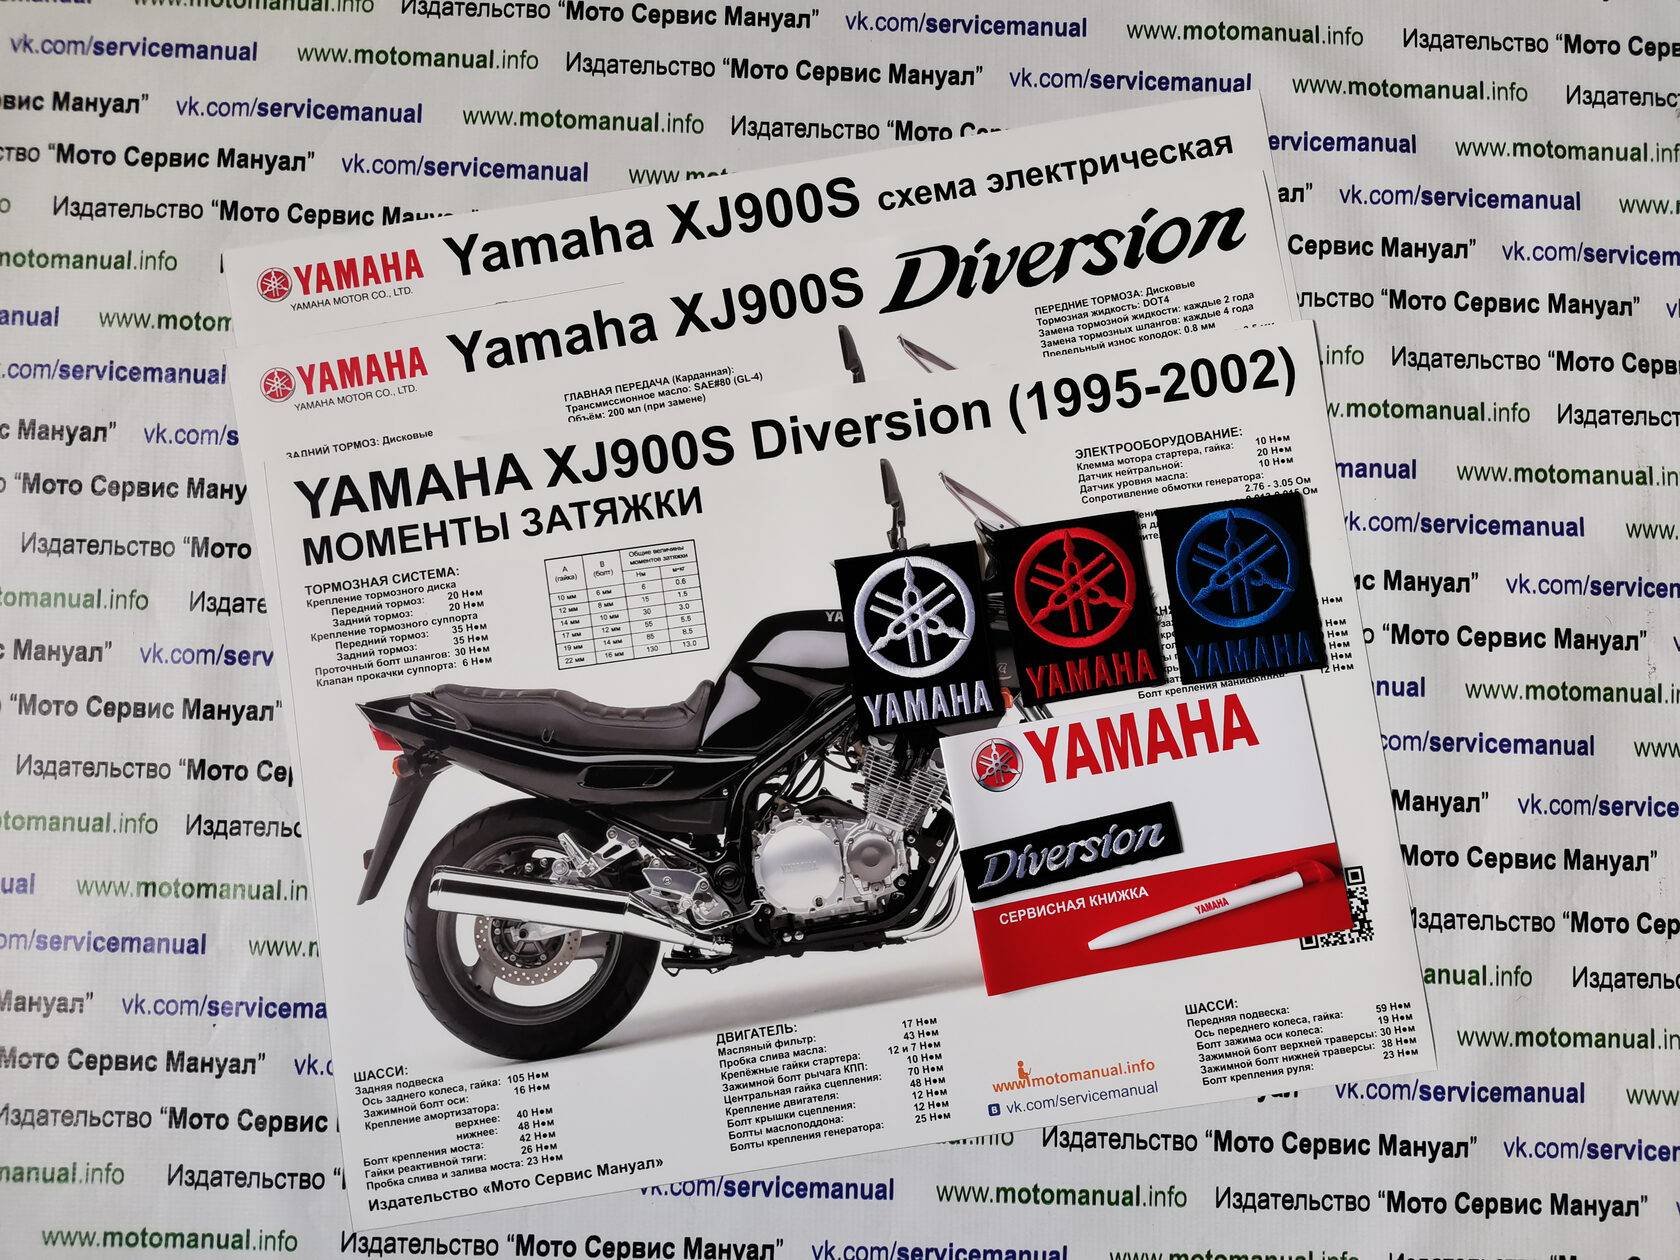 2012 yamaha xj6-s  owner's and service manuals online & download pdf